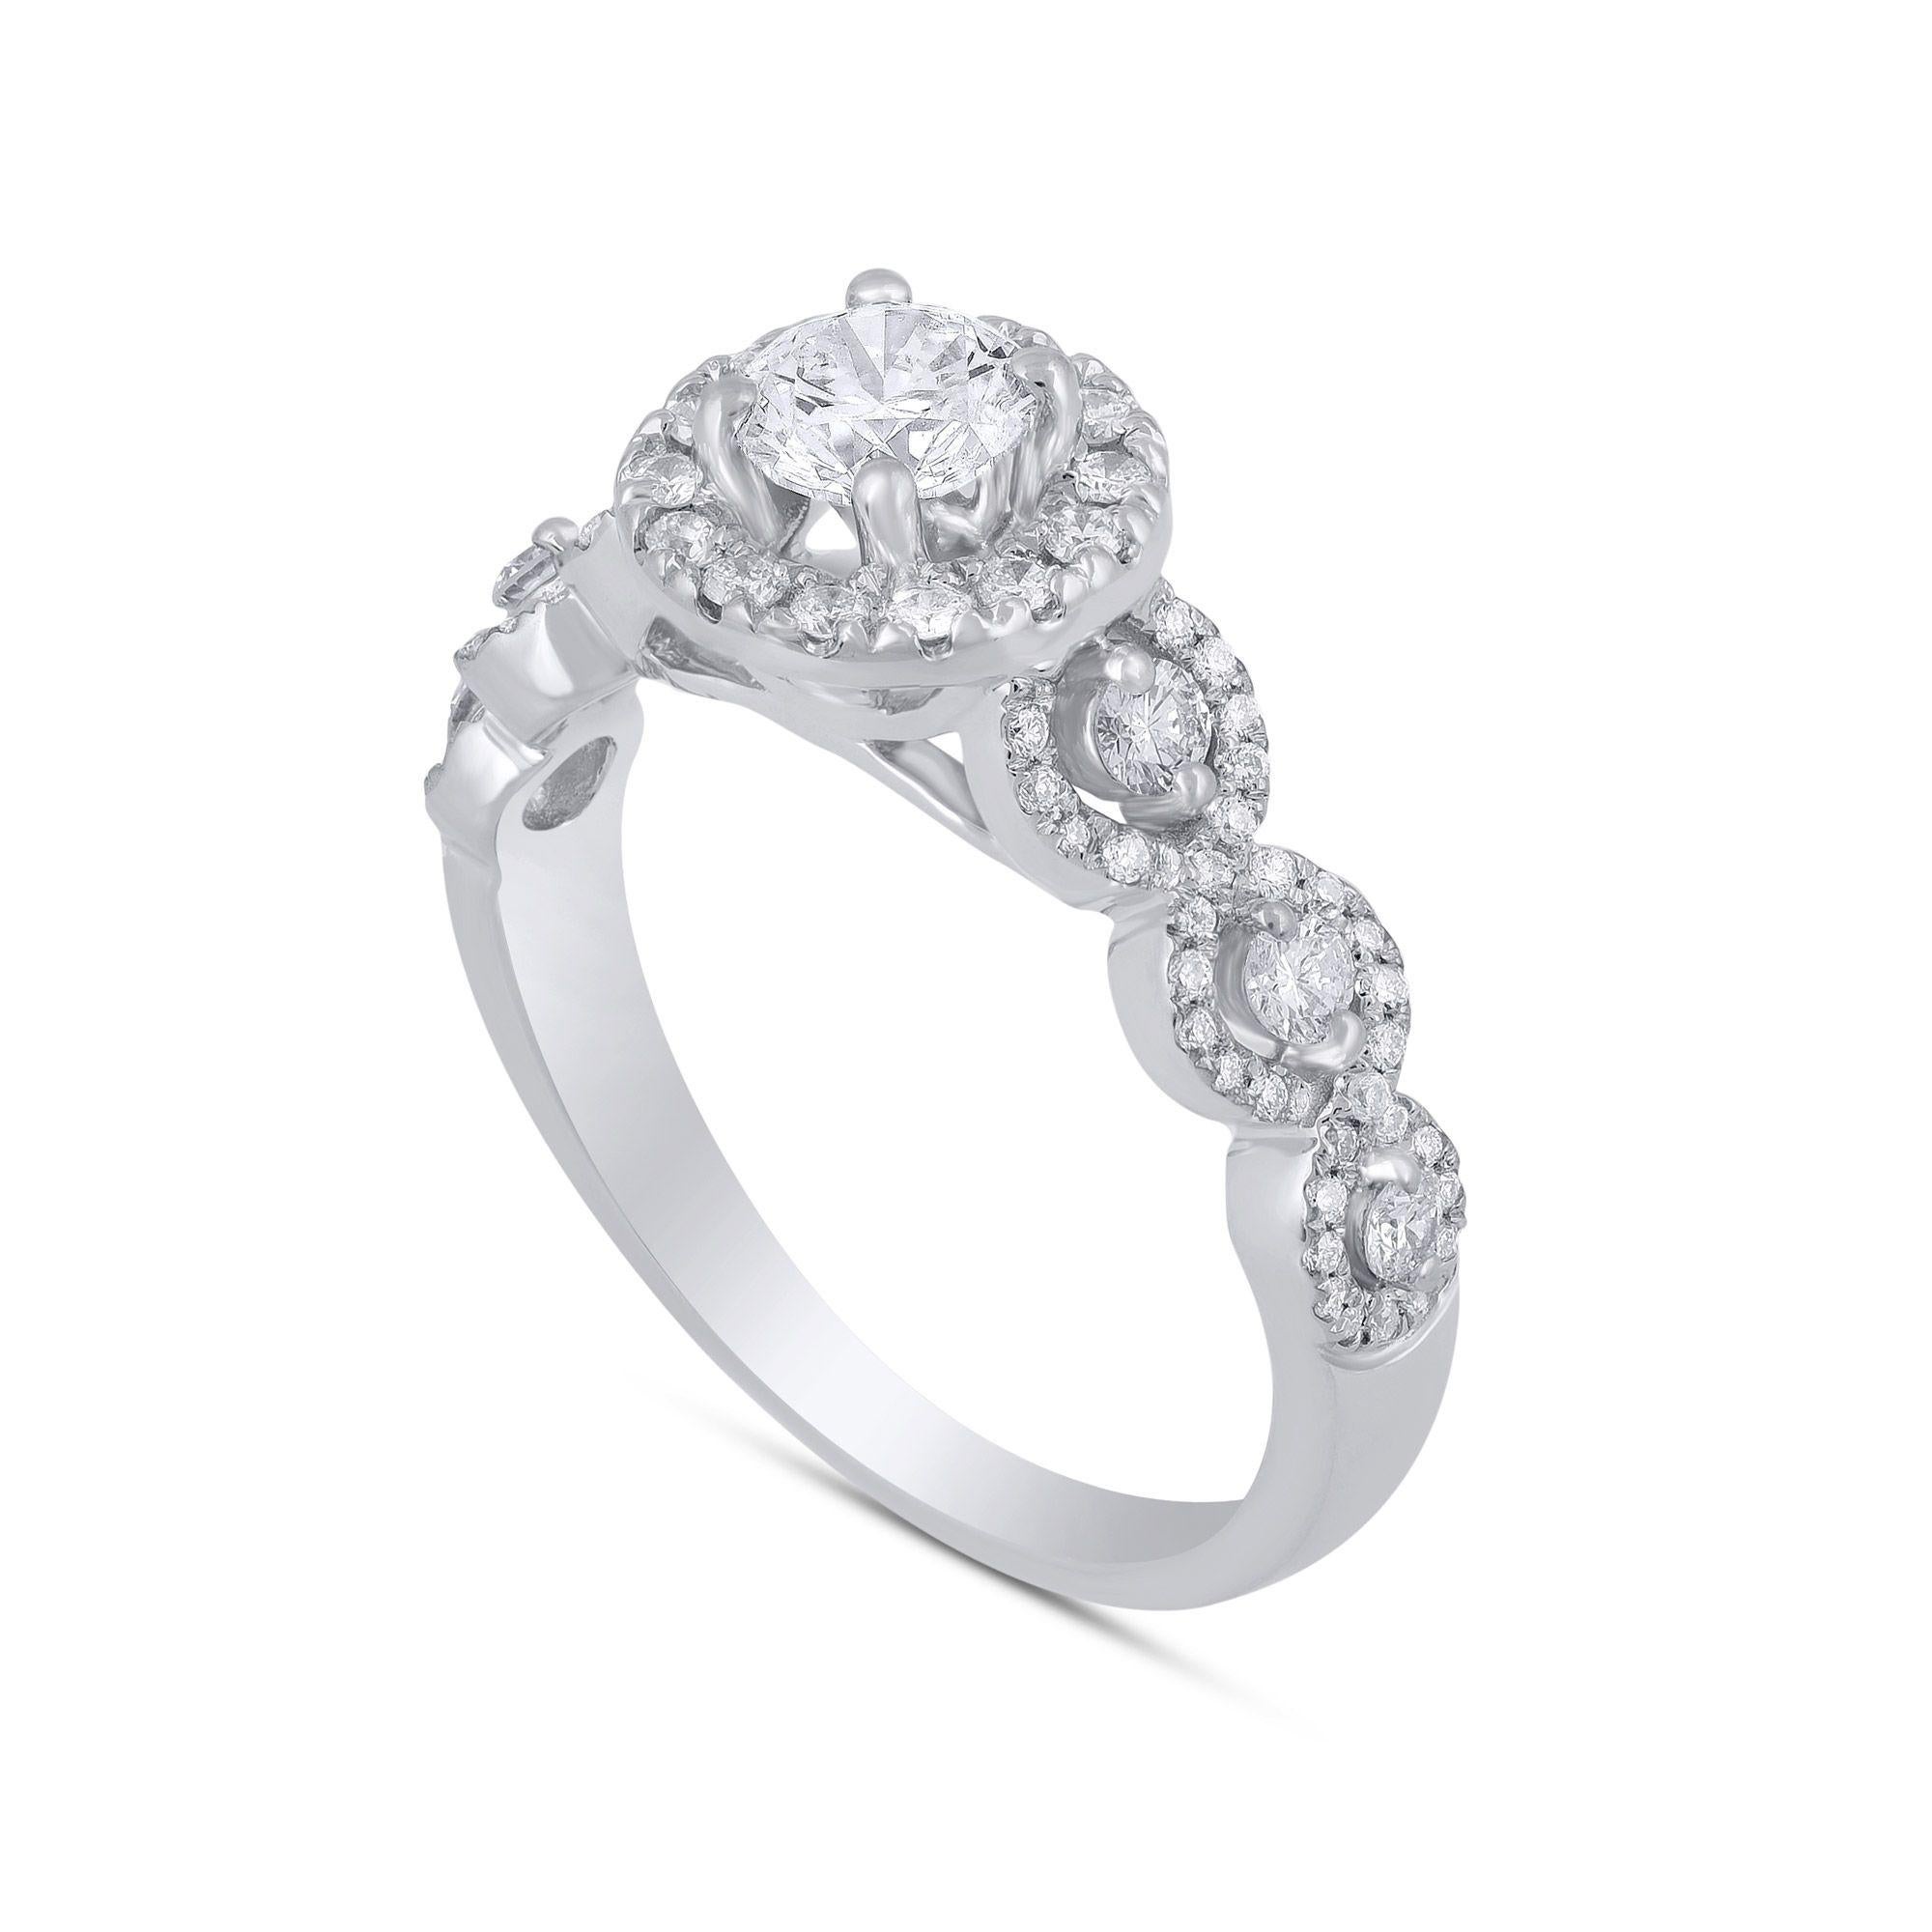 A gorgeous 14 karat White Gold Diamond Bridal Ring studded with 85 diamonds in prong and pave setting. Diamond grading - G-H Color, I1-I2 Clarity.
